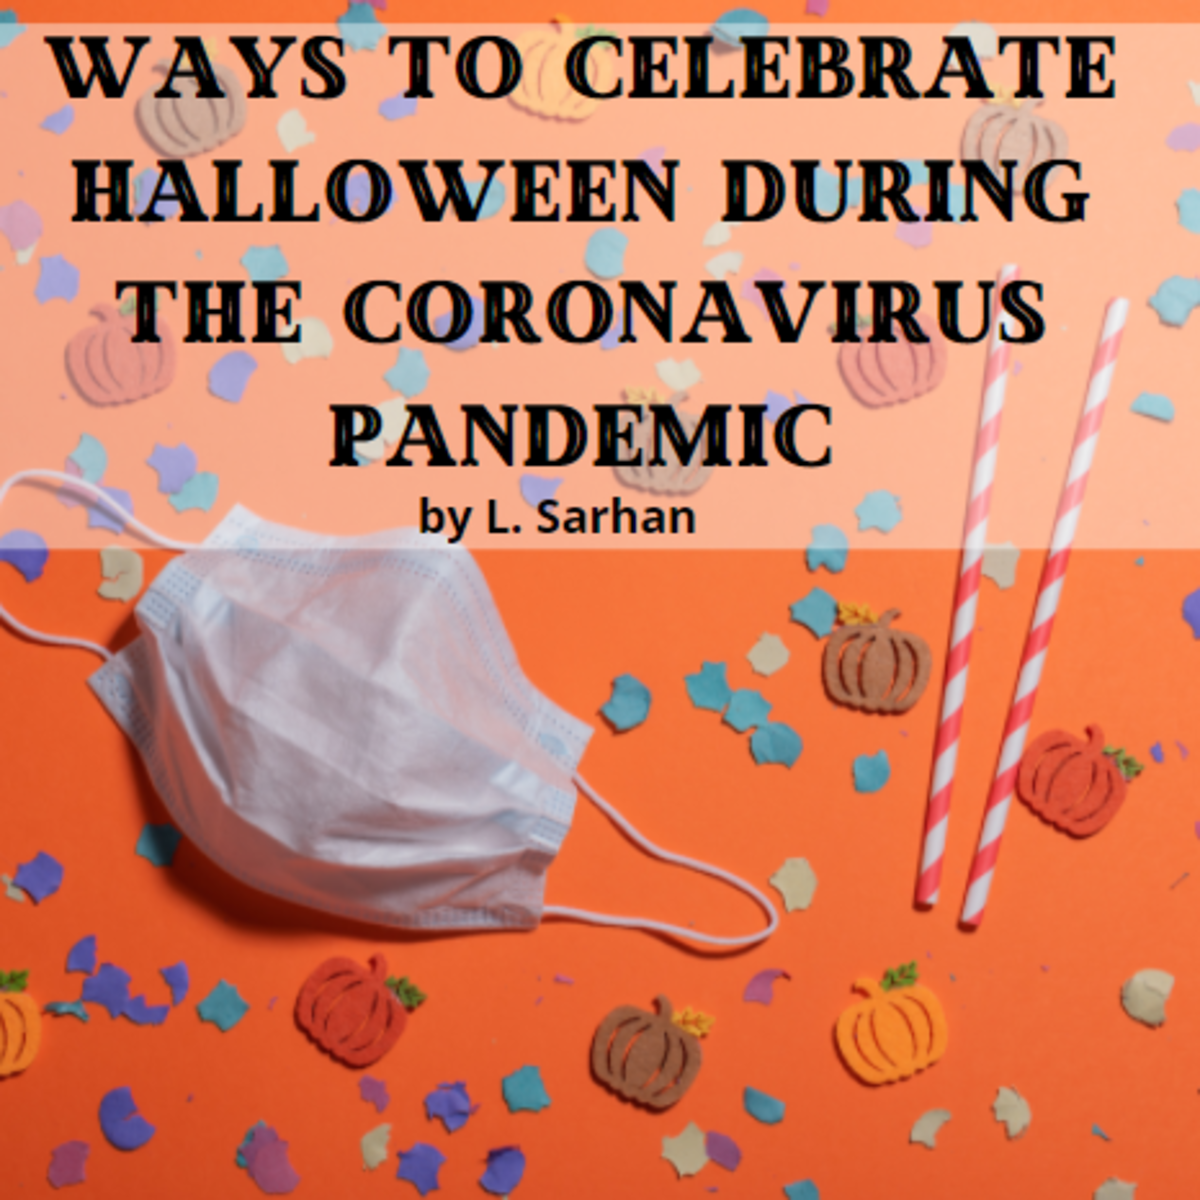 How to Celebrate Halloween Safely During the Coronavirus Pandemic